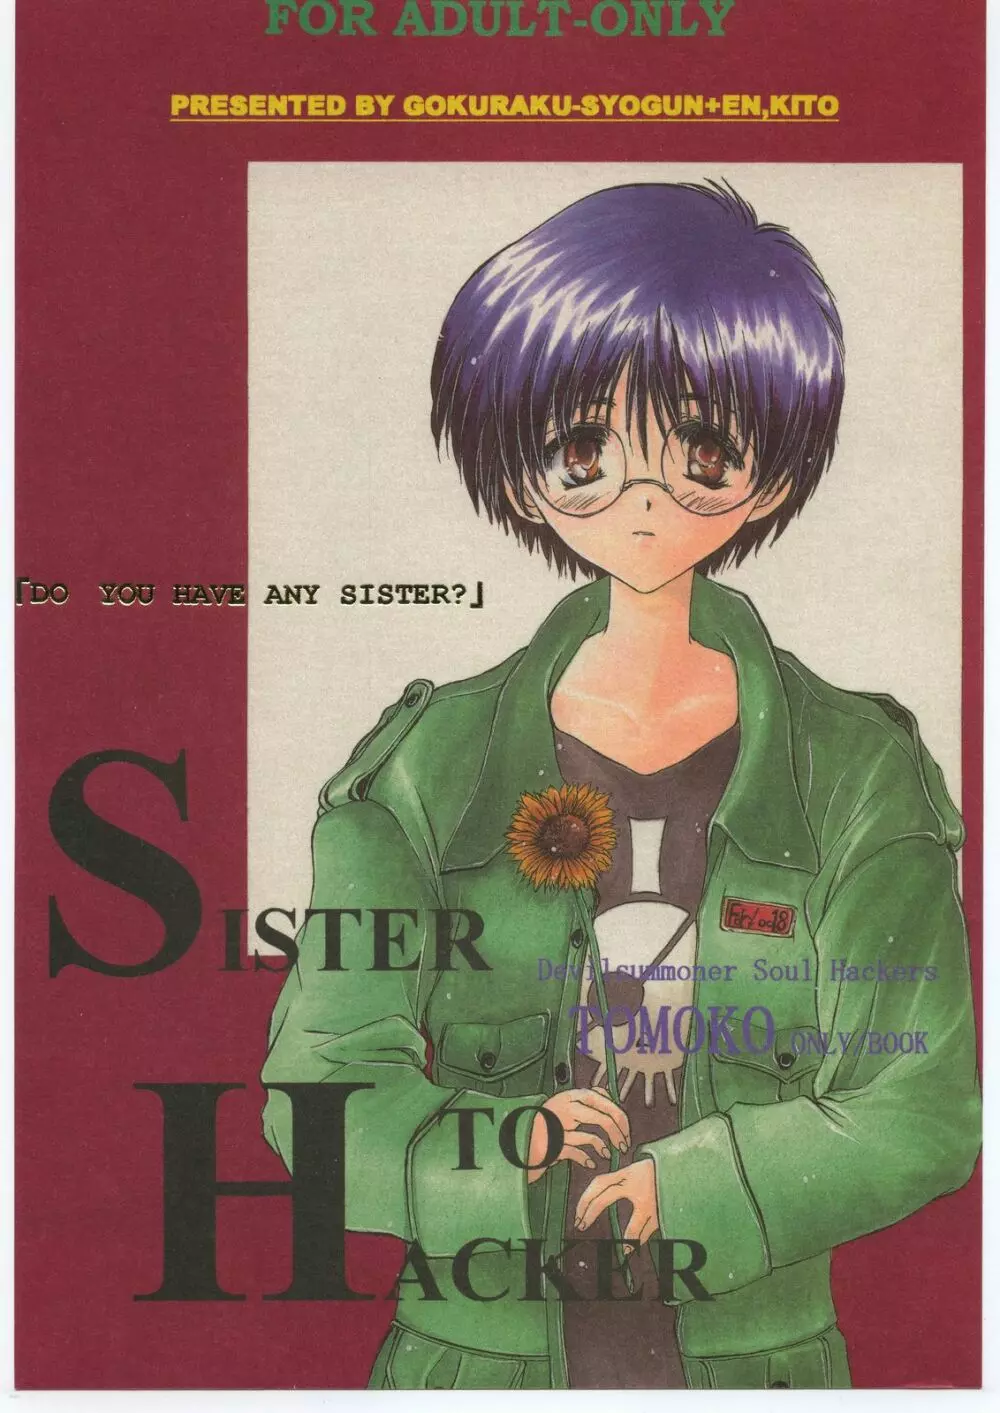 SISTER TO HACKER